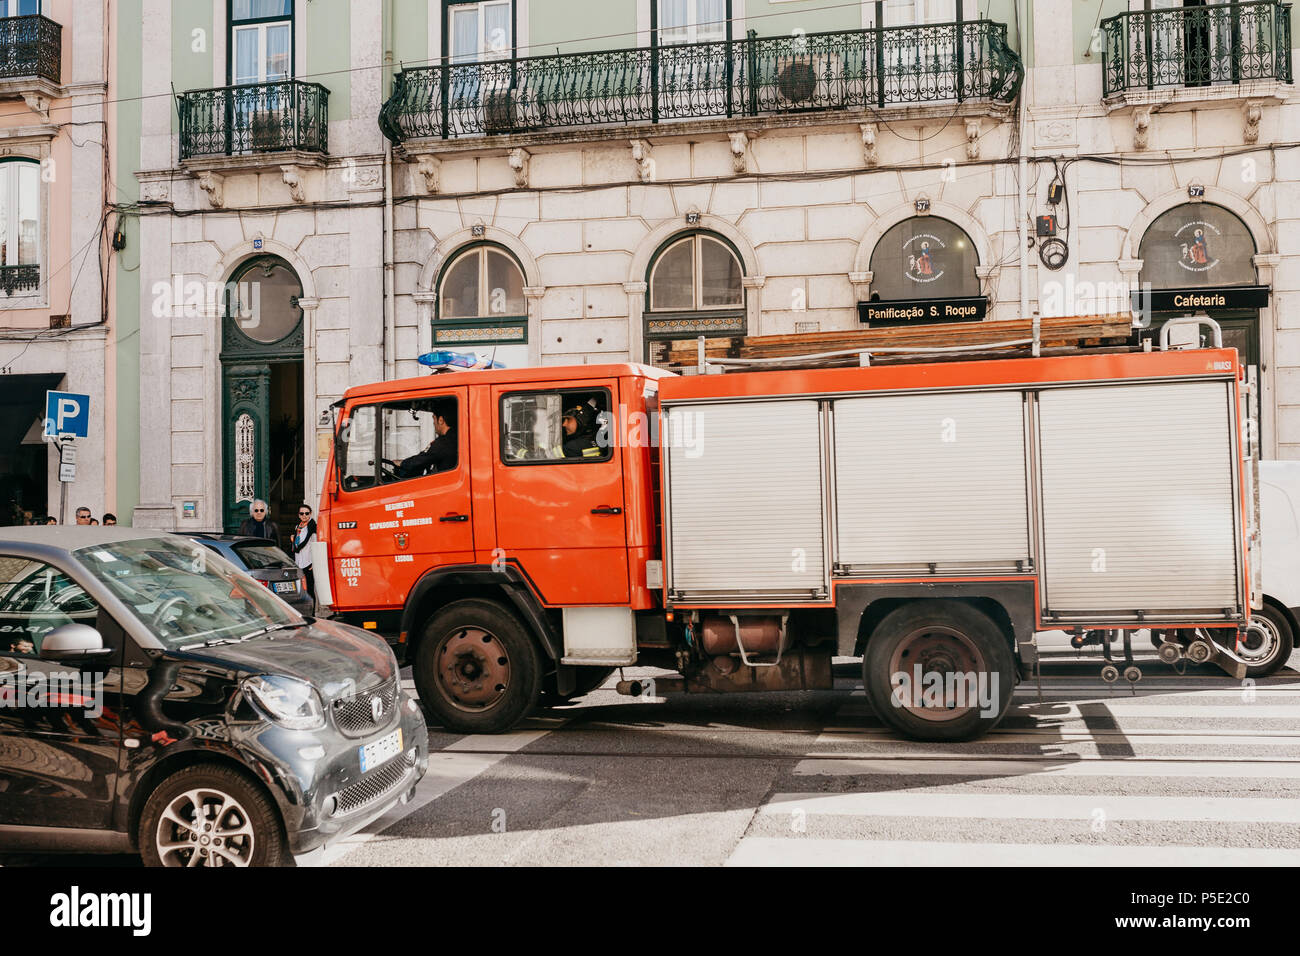 Portugal, Lisbon, May 1, 2018: A modern Portuguese fire truck is driving along a city street Stock Photo